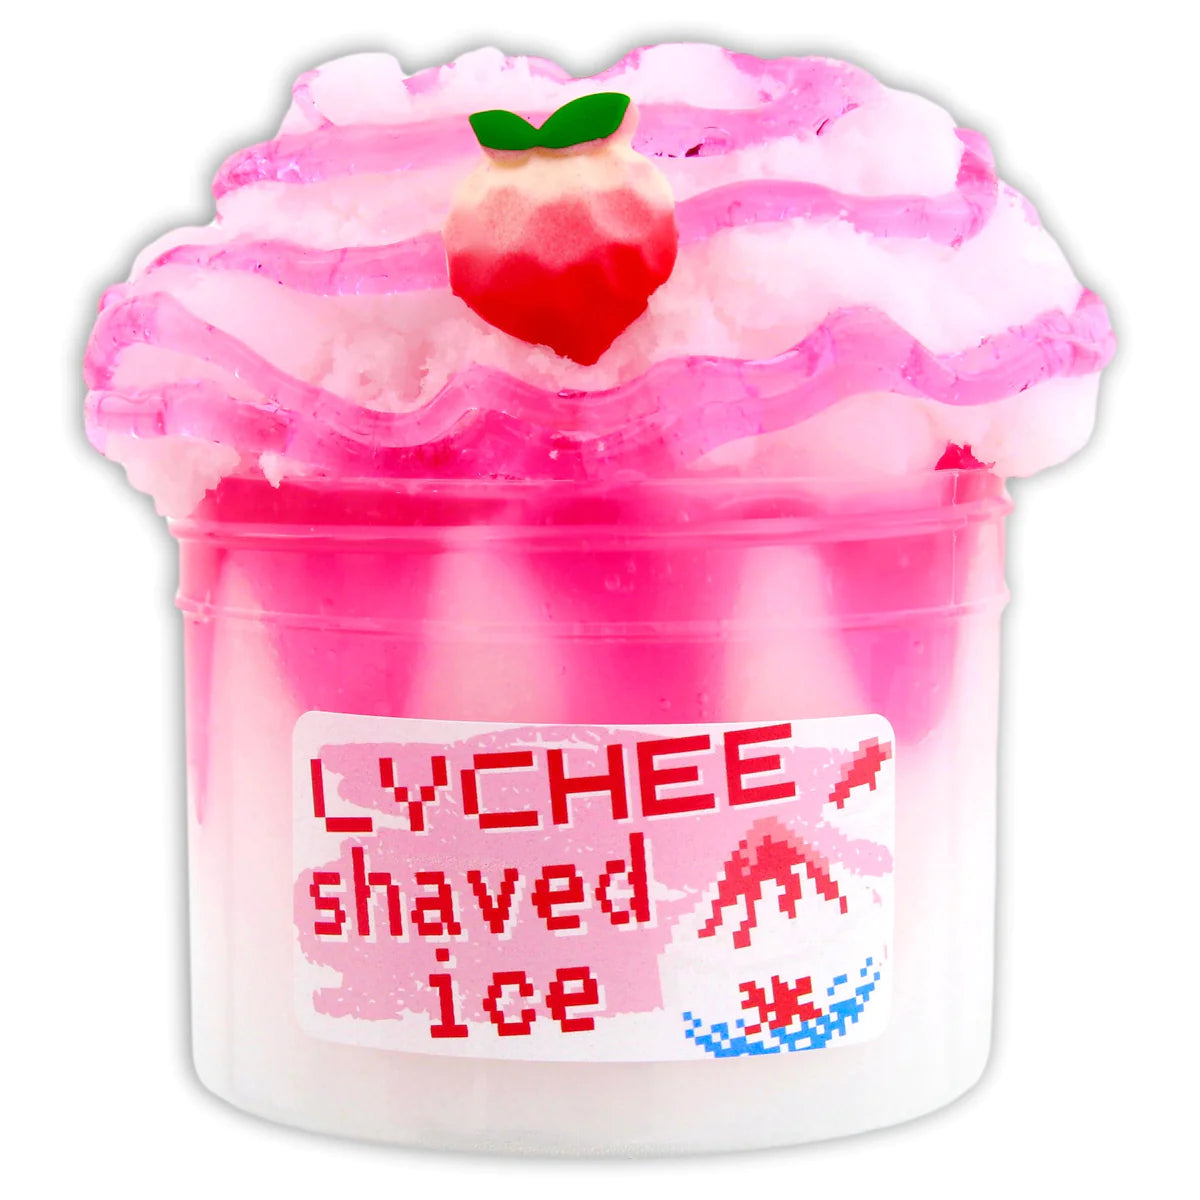 Dope Slimes Lychee Shaved Ice